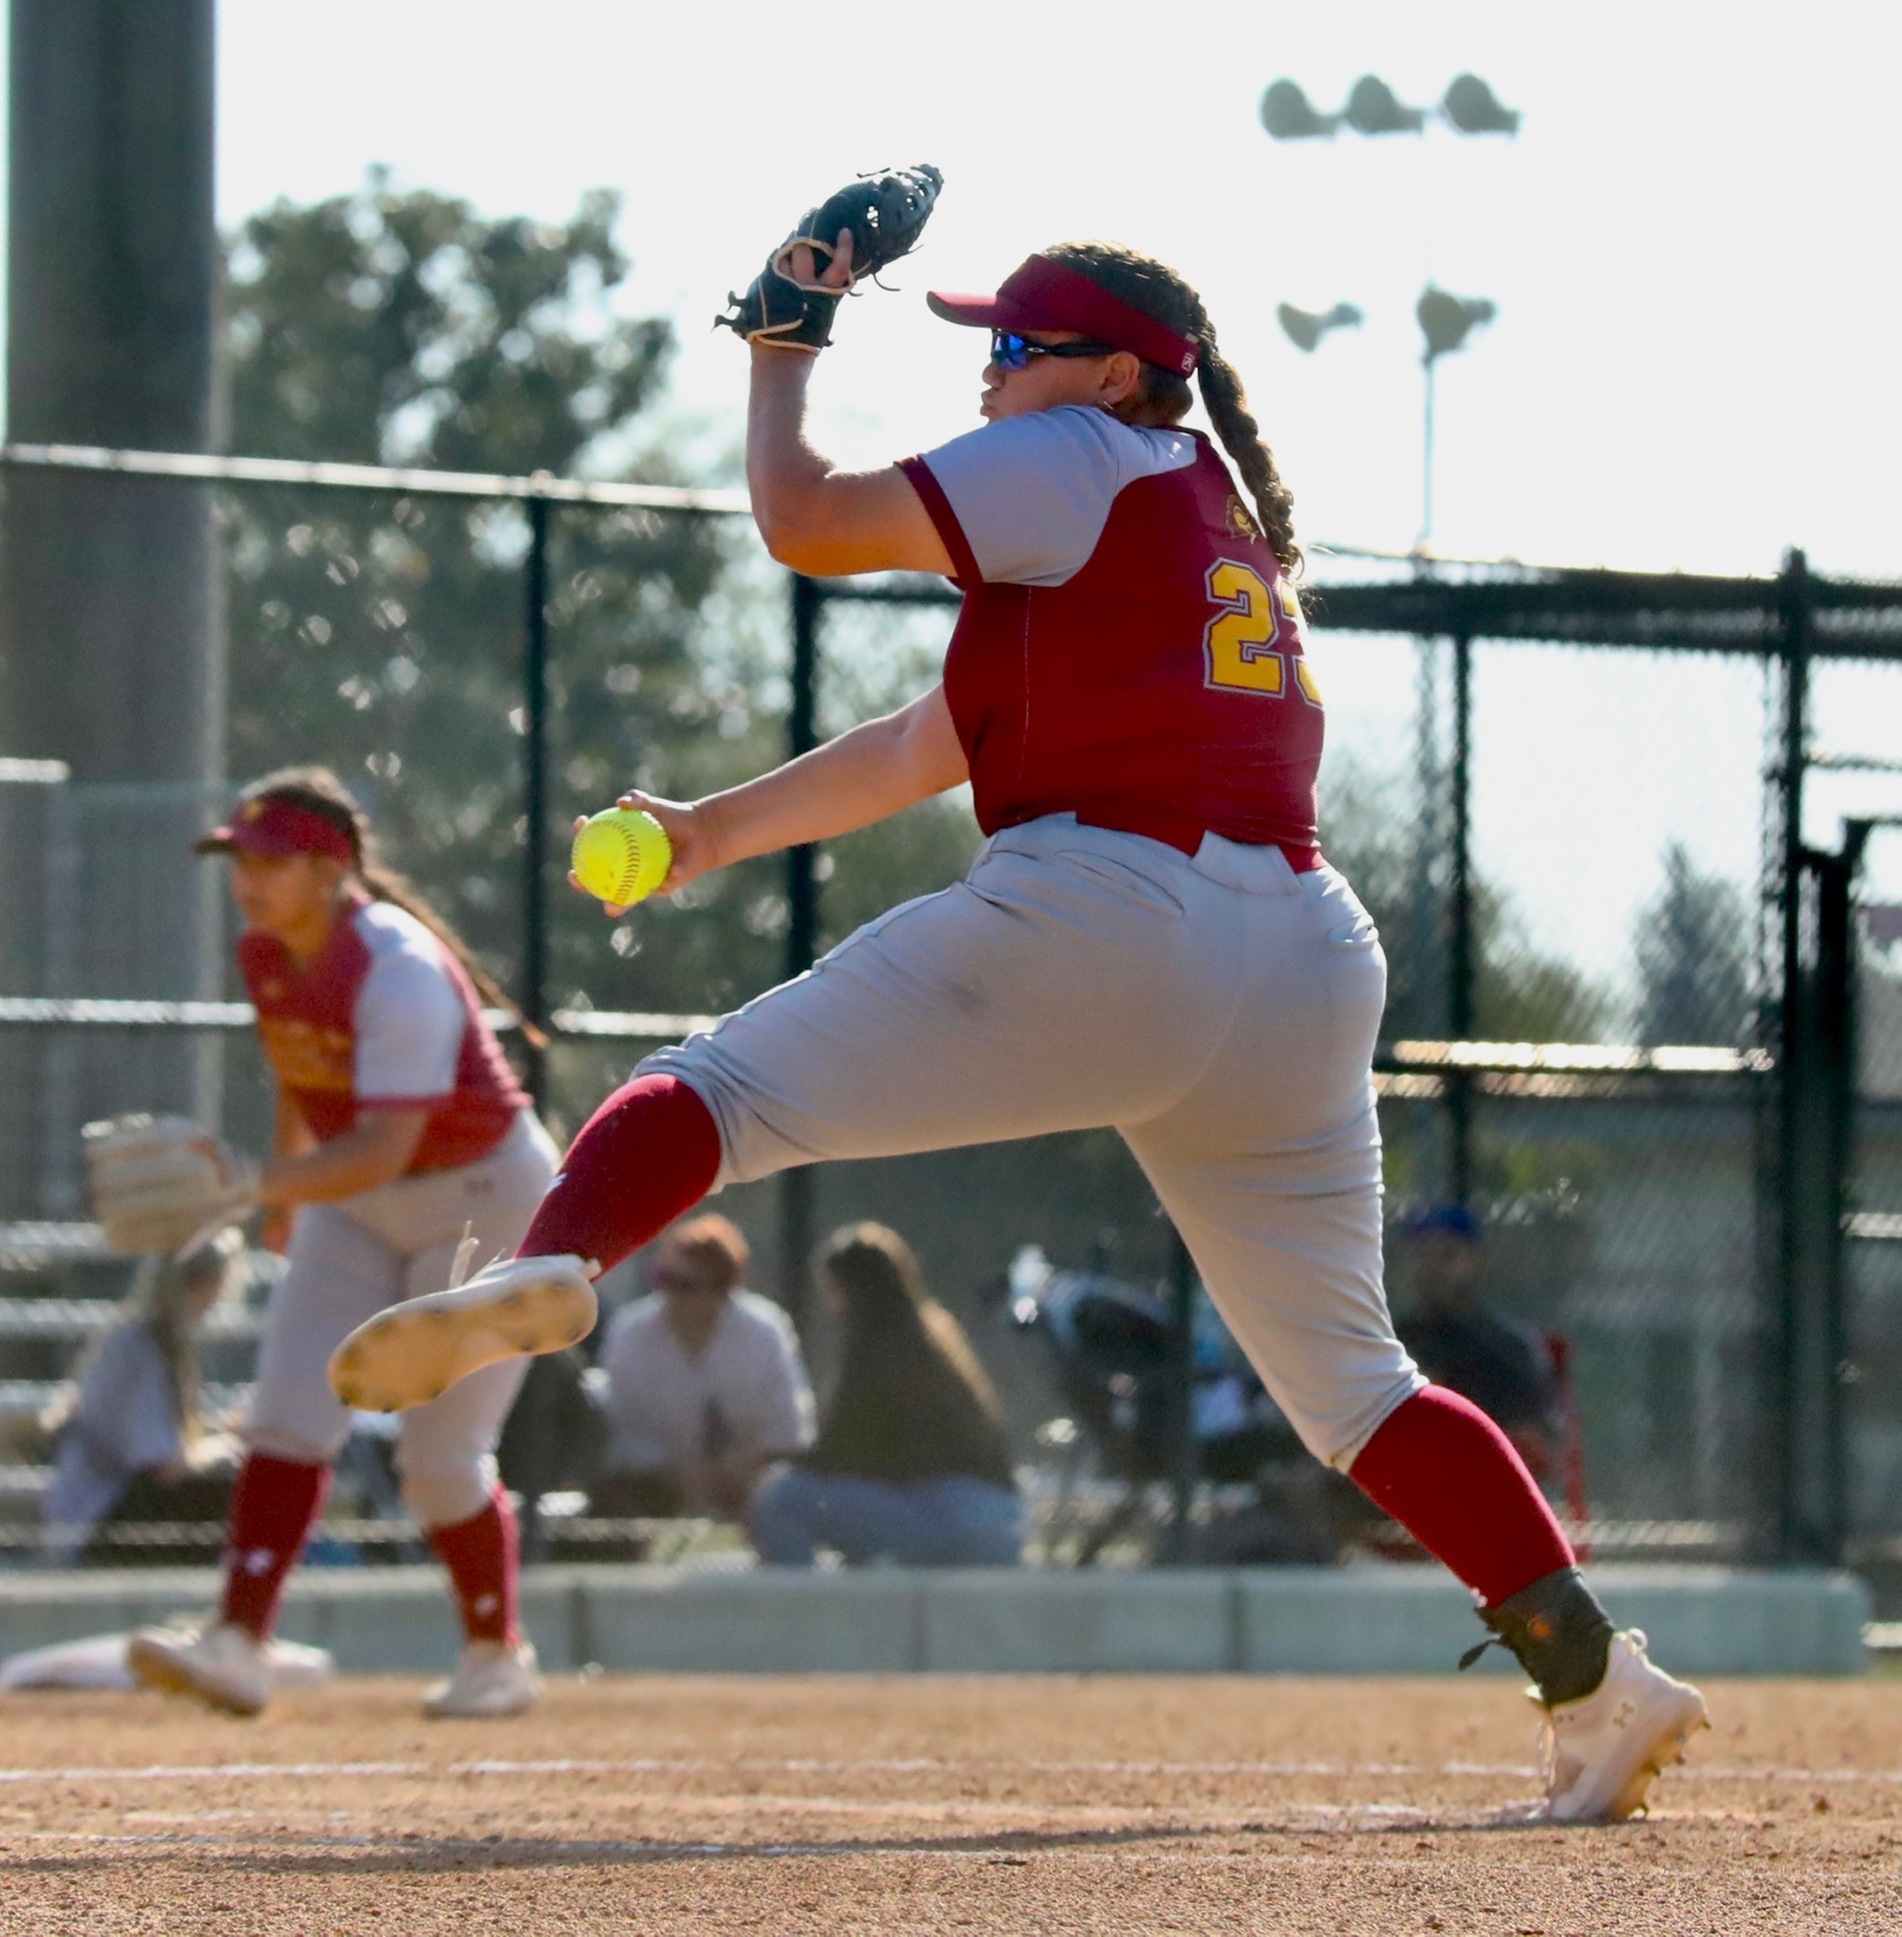 Kiley Kraft delivers a pitch during today's win at Citrus College (photo by Michael Watkins, Athletics).